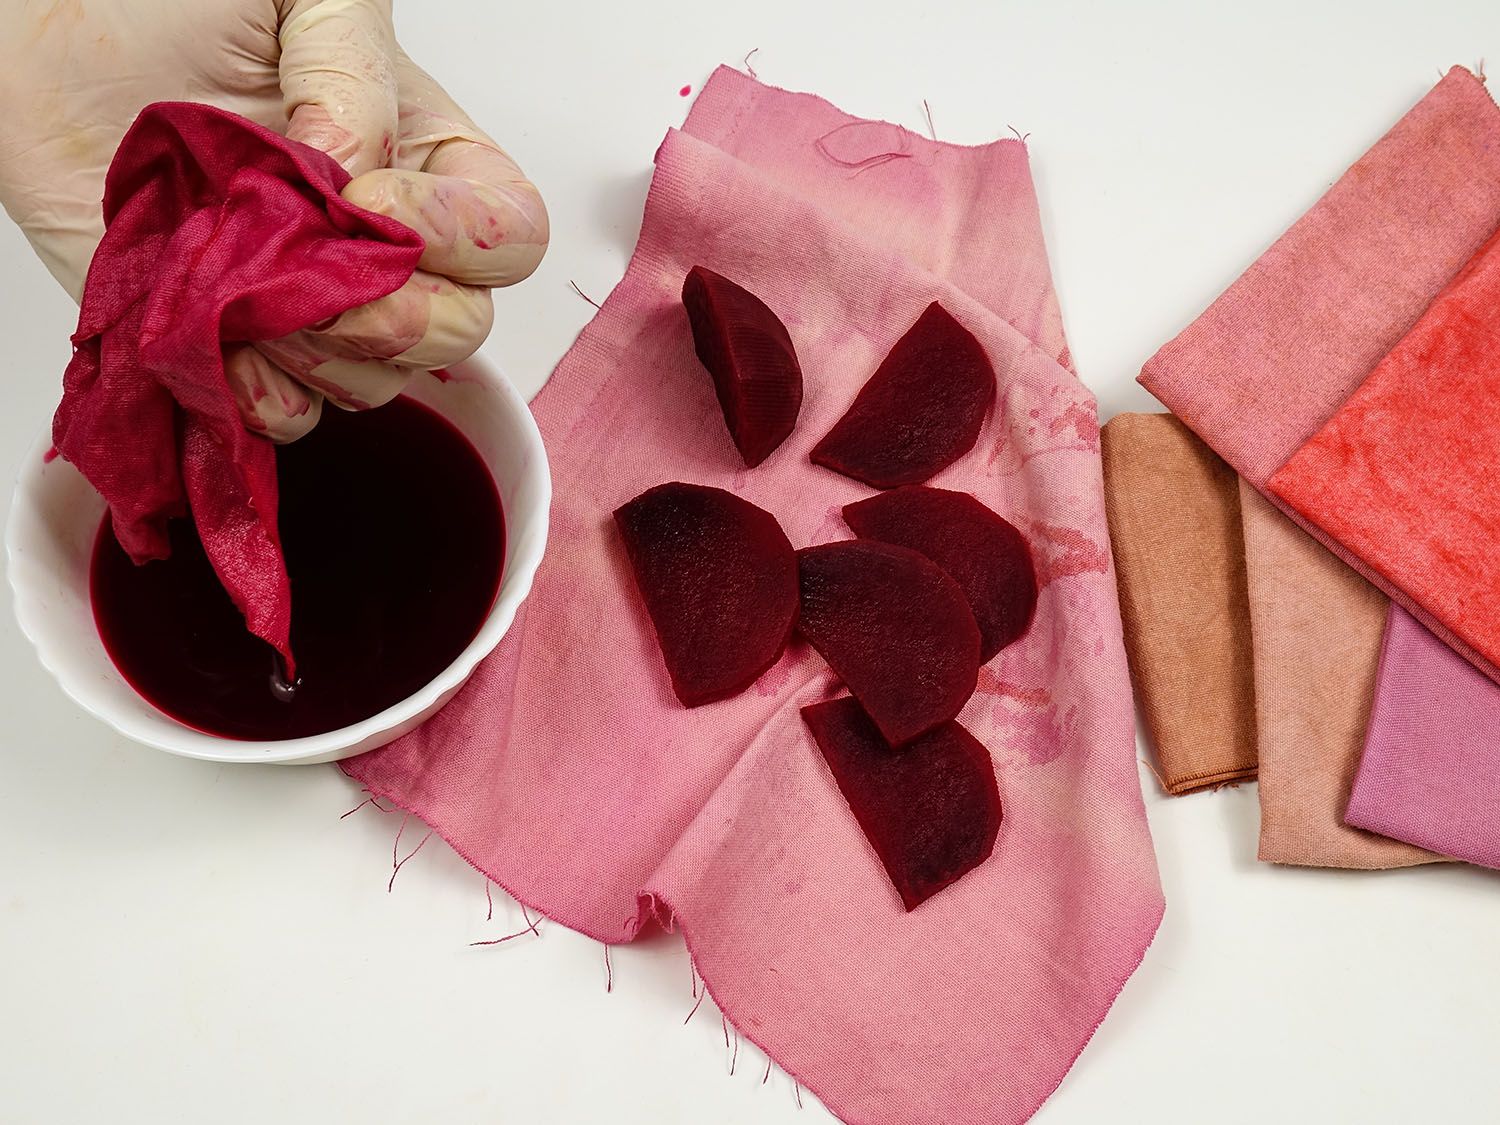 How to make natural dyes at home